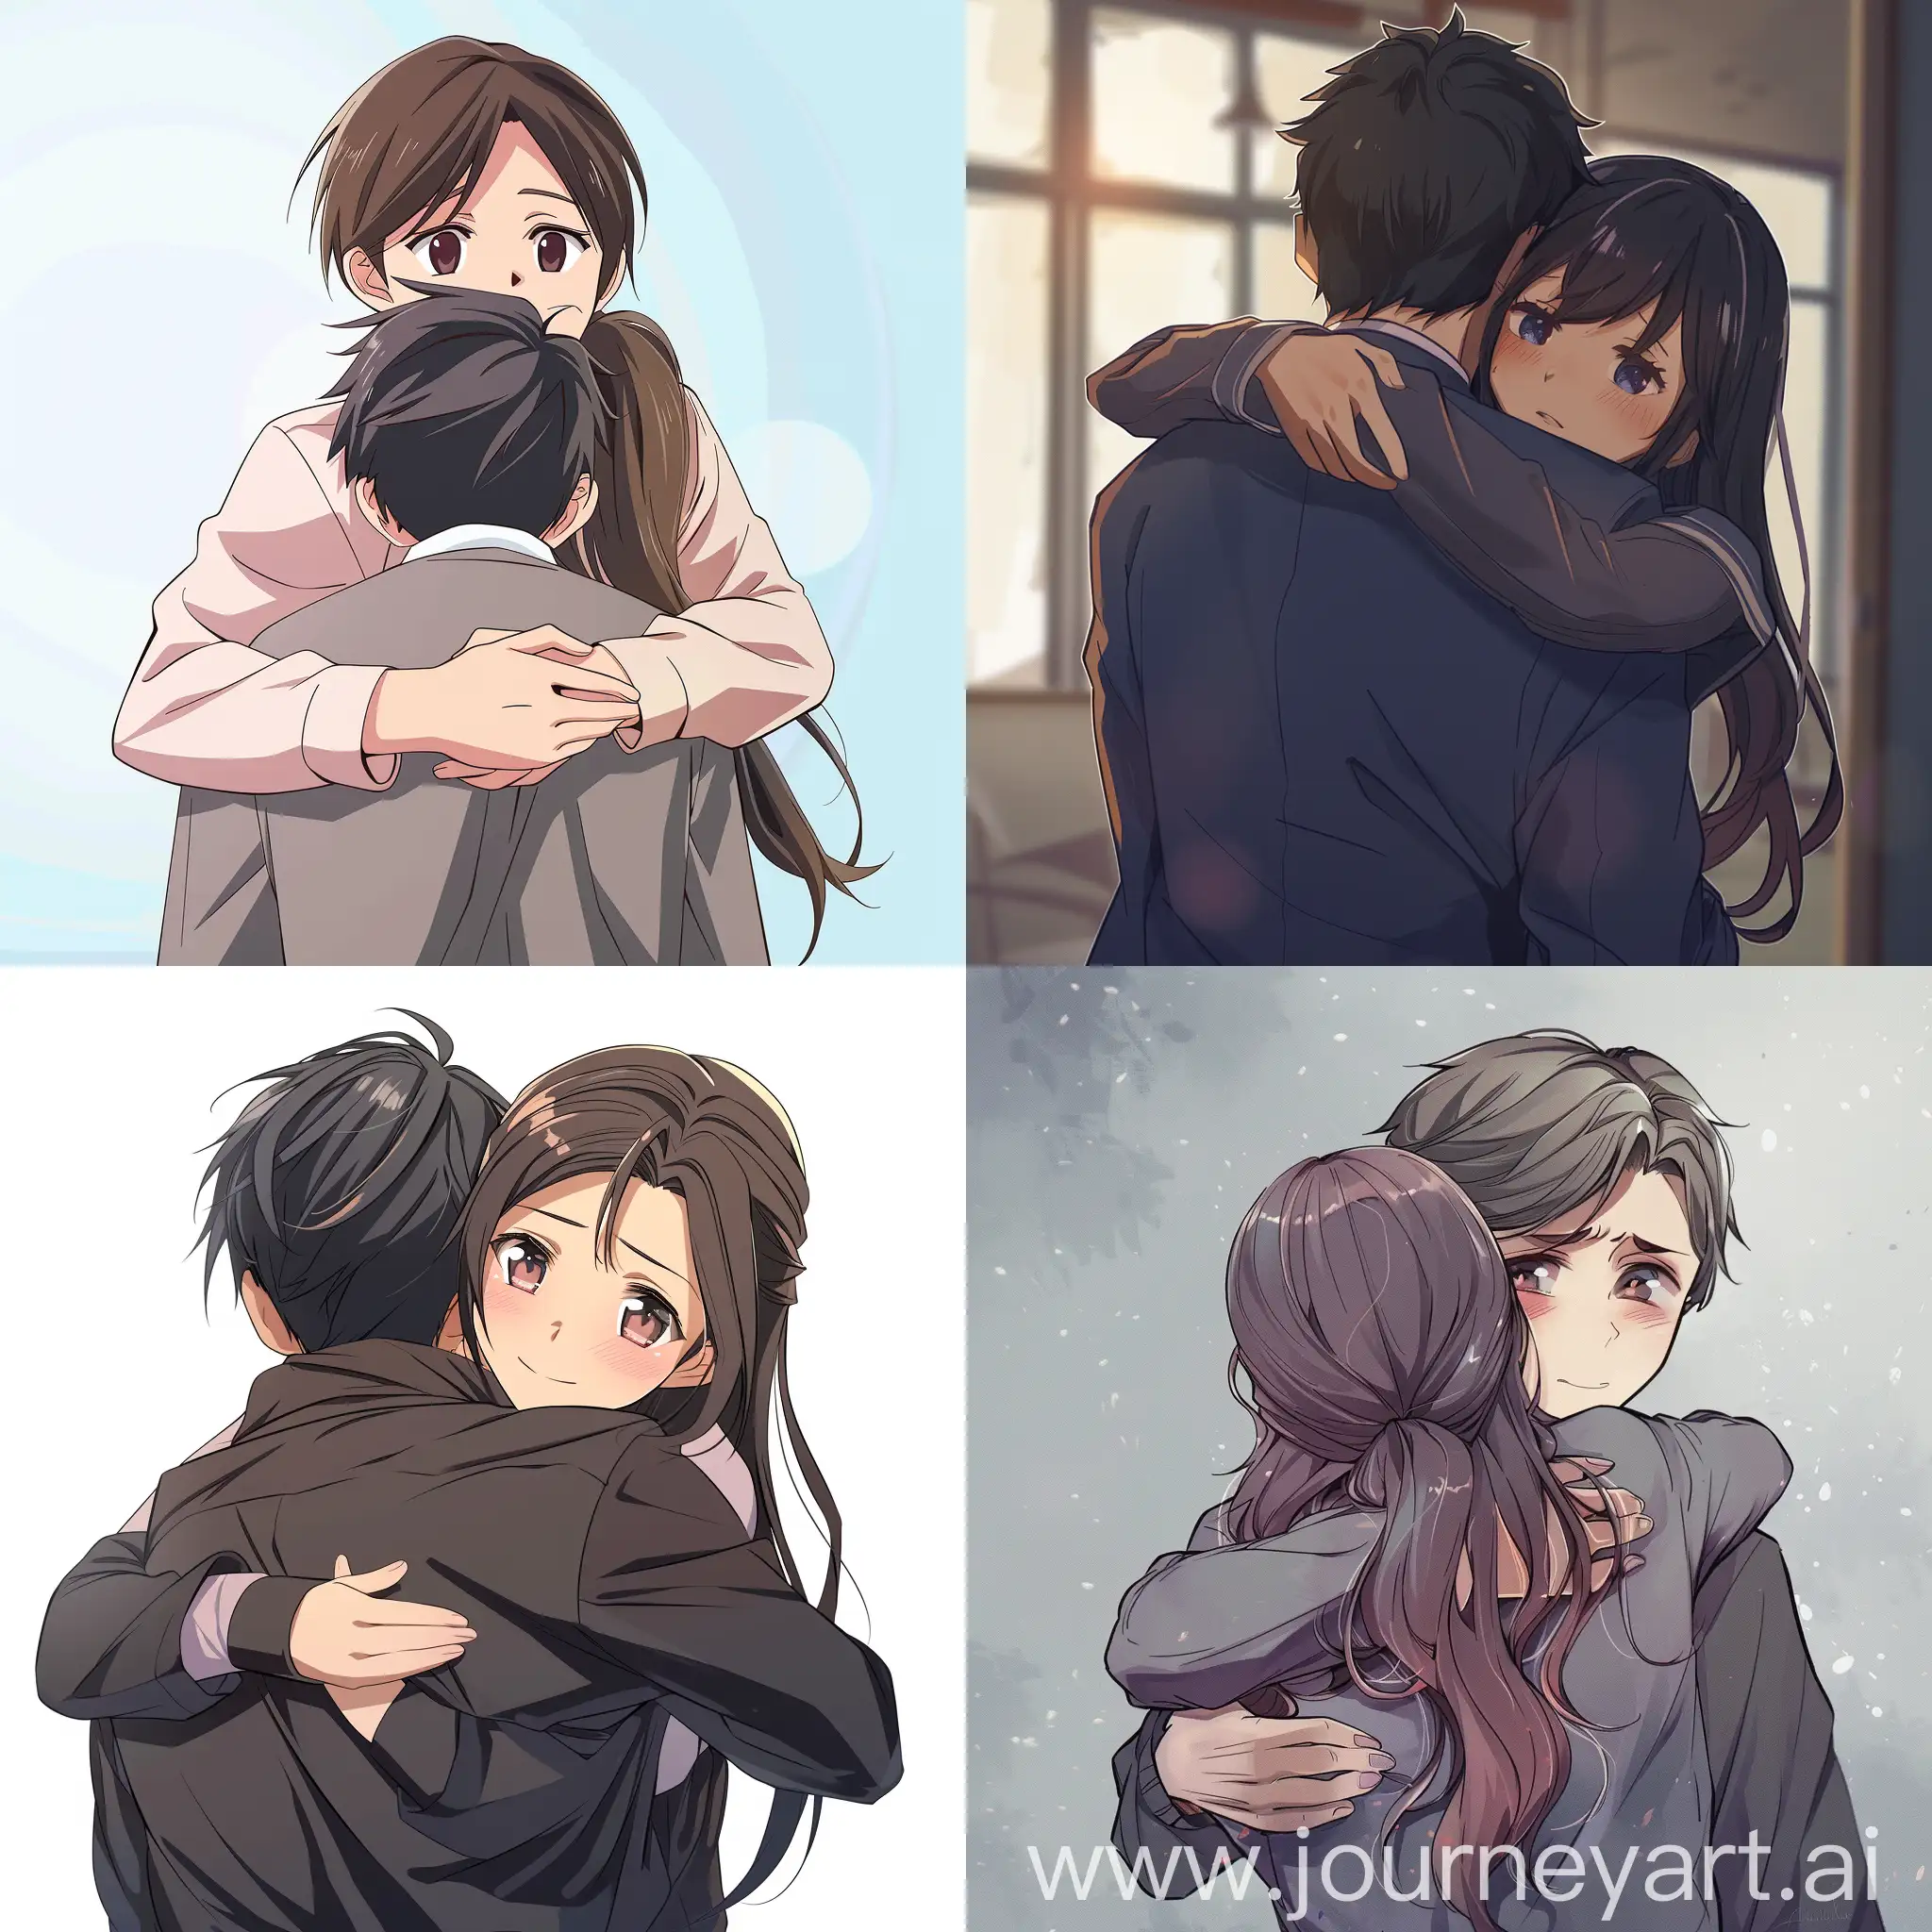 Affectionate-Anime-Couple-Embracing-from-Behind